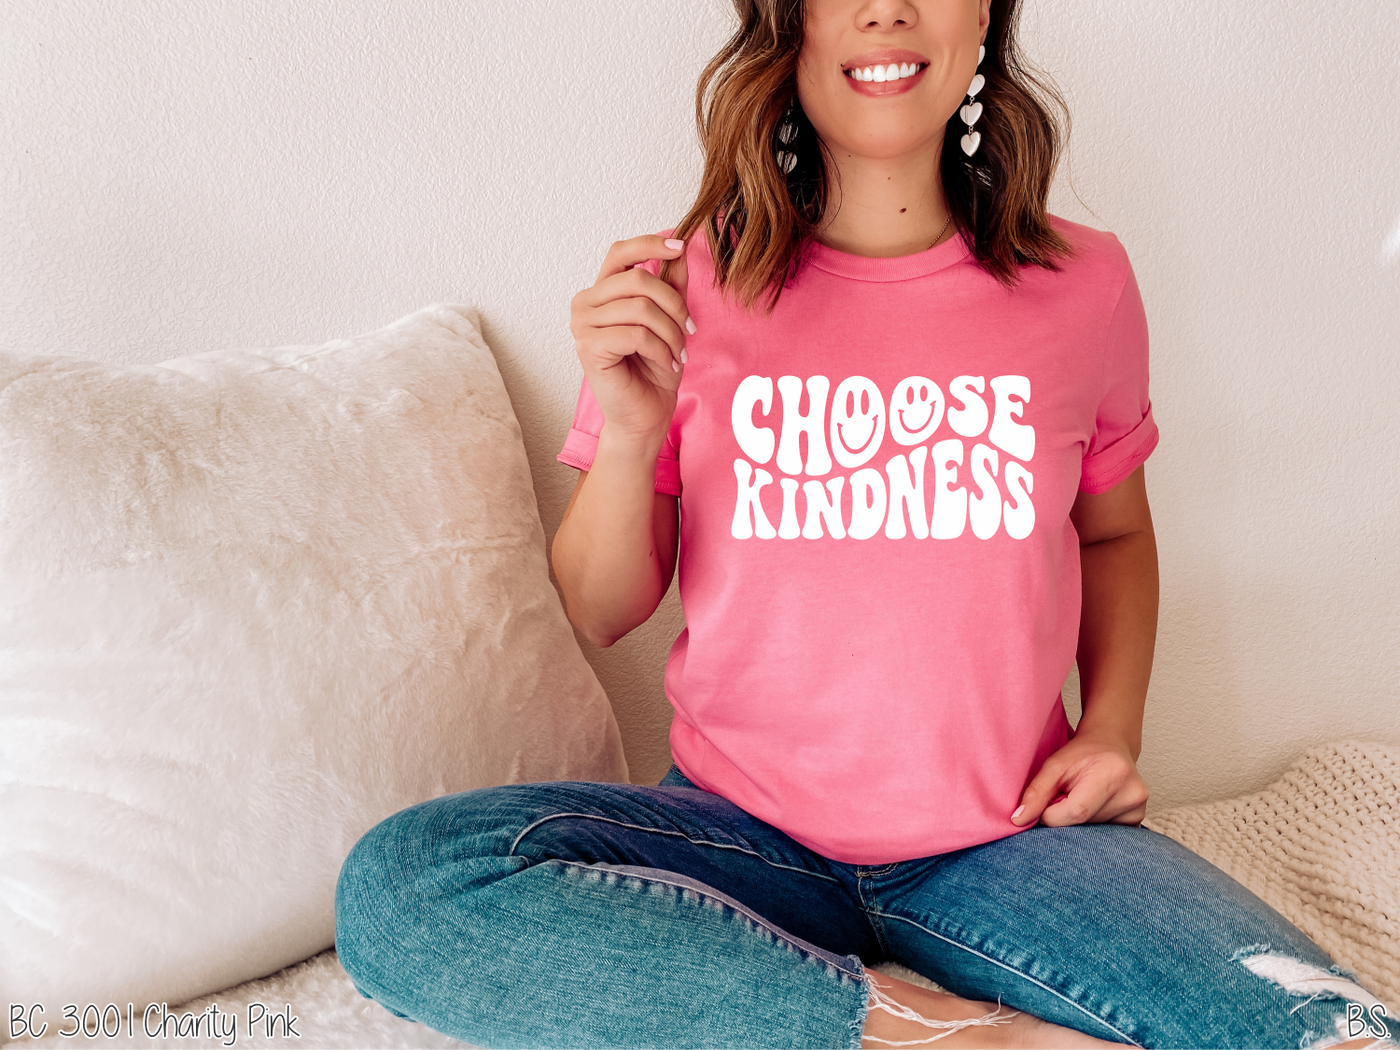 "Choose Kindness" T-shirt (shown on "Charity Pink")